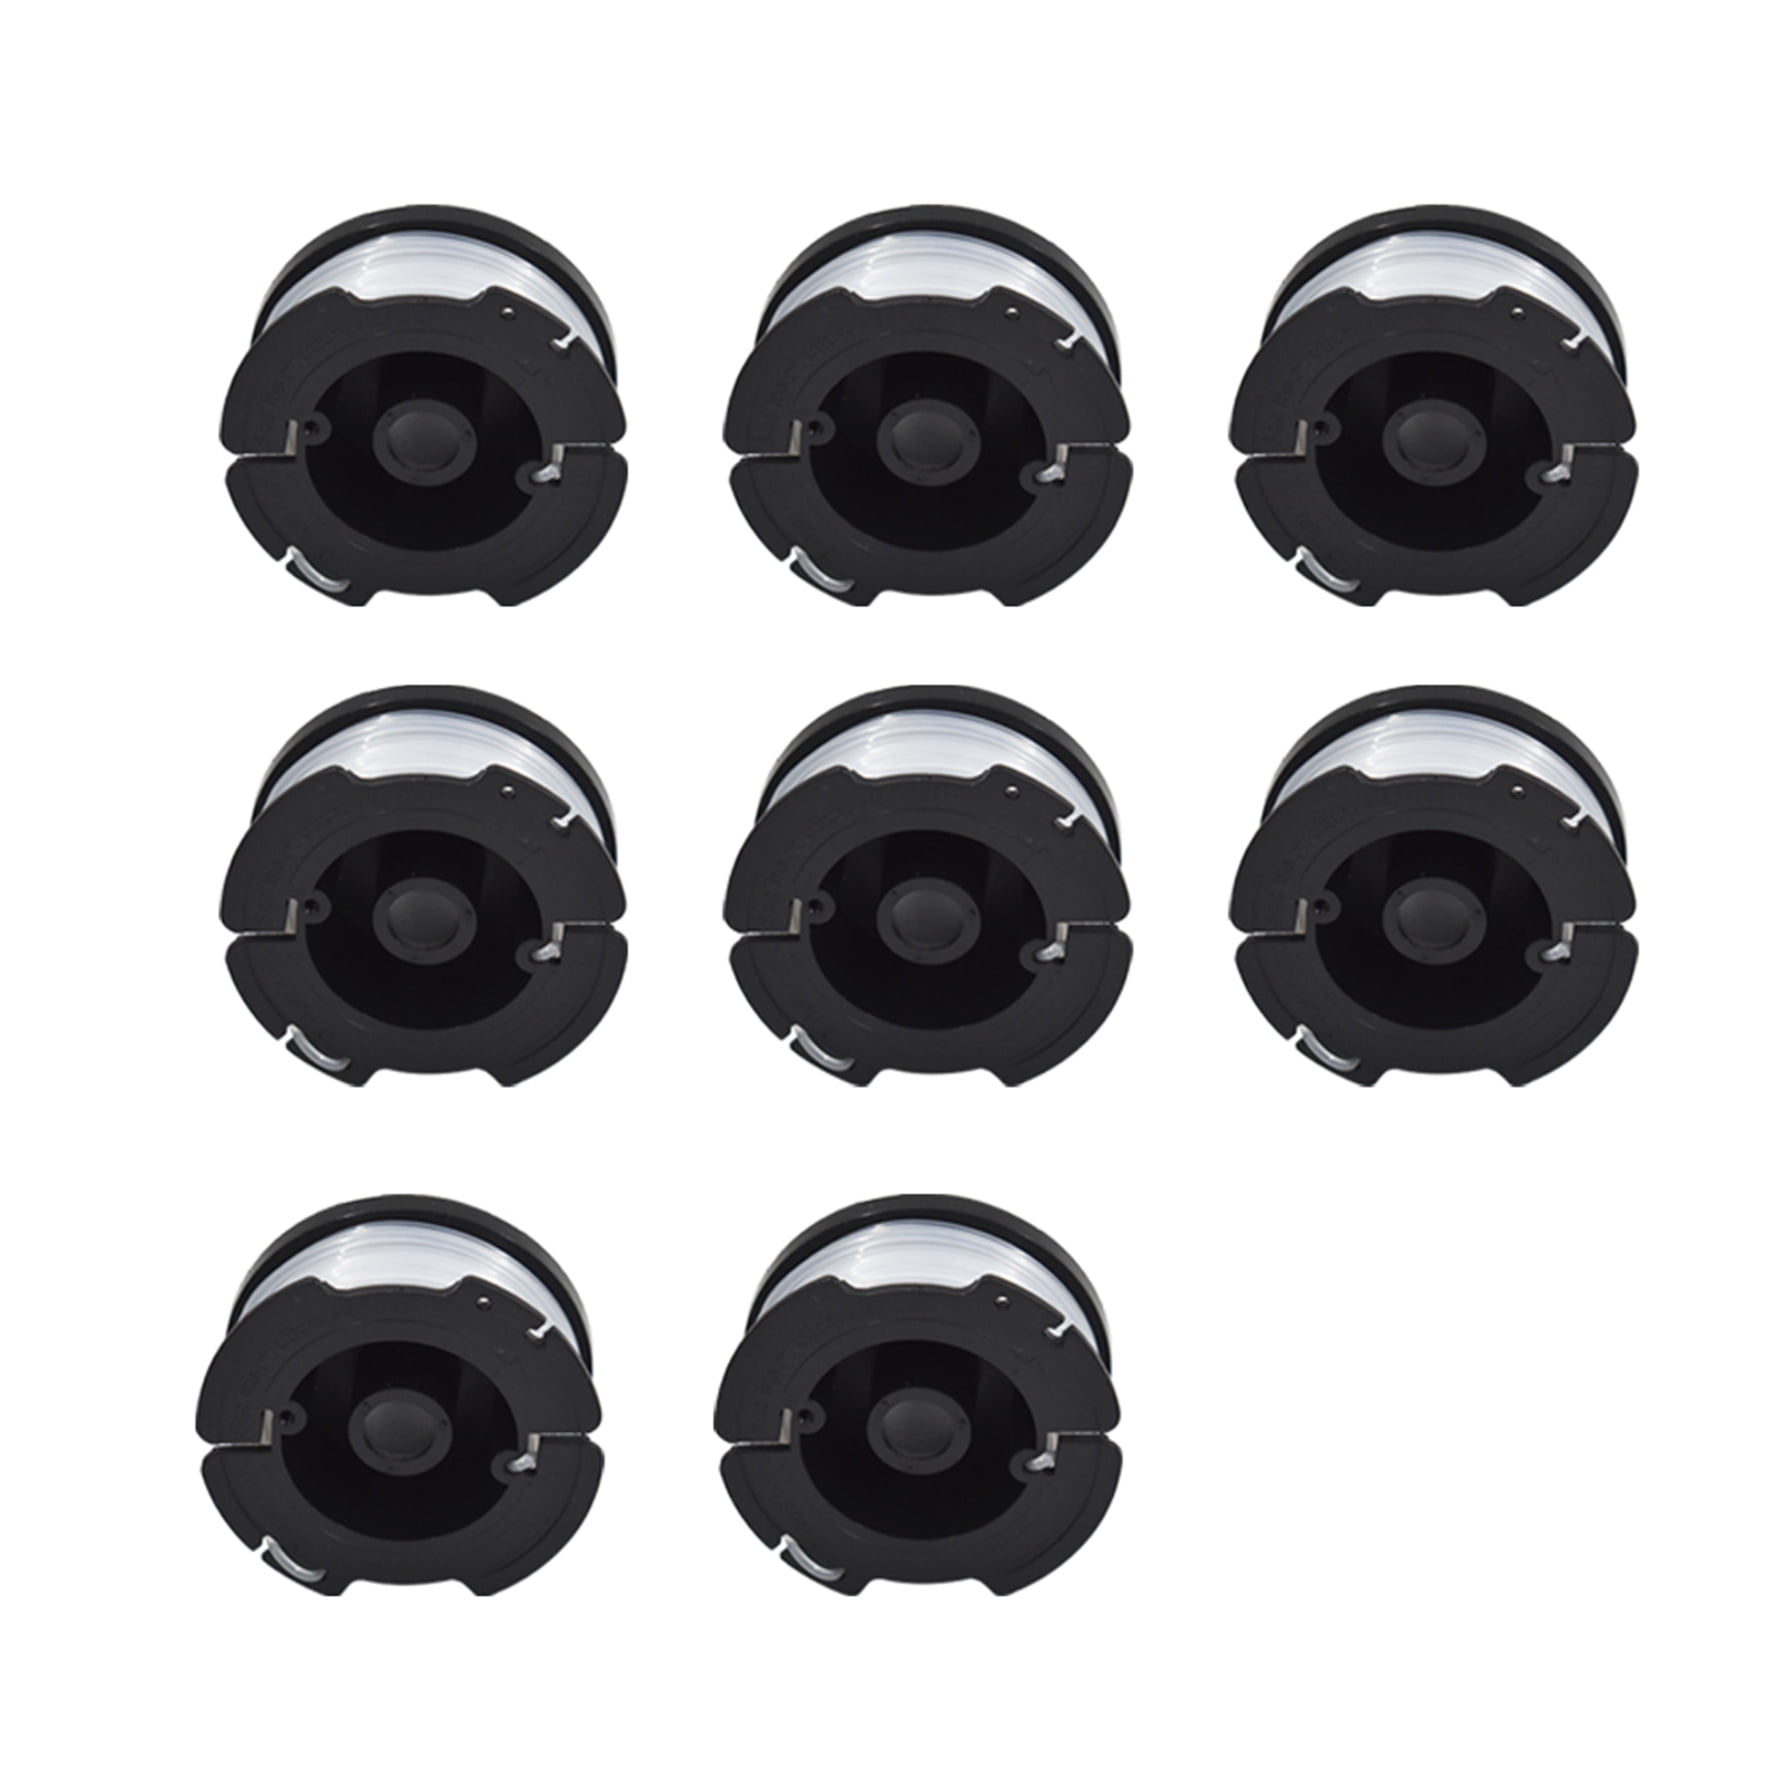 ZONOWN 8 Pack Weed Eater Replacement Spools Compatible with Black&Decker AF-100 LST420 GH900 String Trimmer 8 Spool,2 Cap&Spring 2 Pack Spool Cap & Spring 30ft 0.065 Trimmer Line 